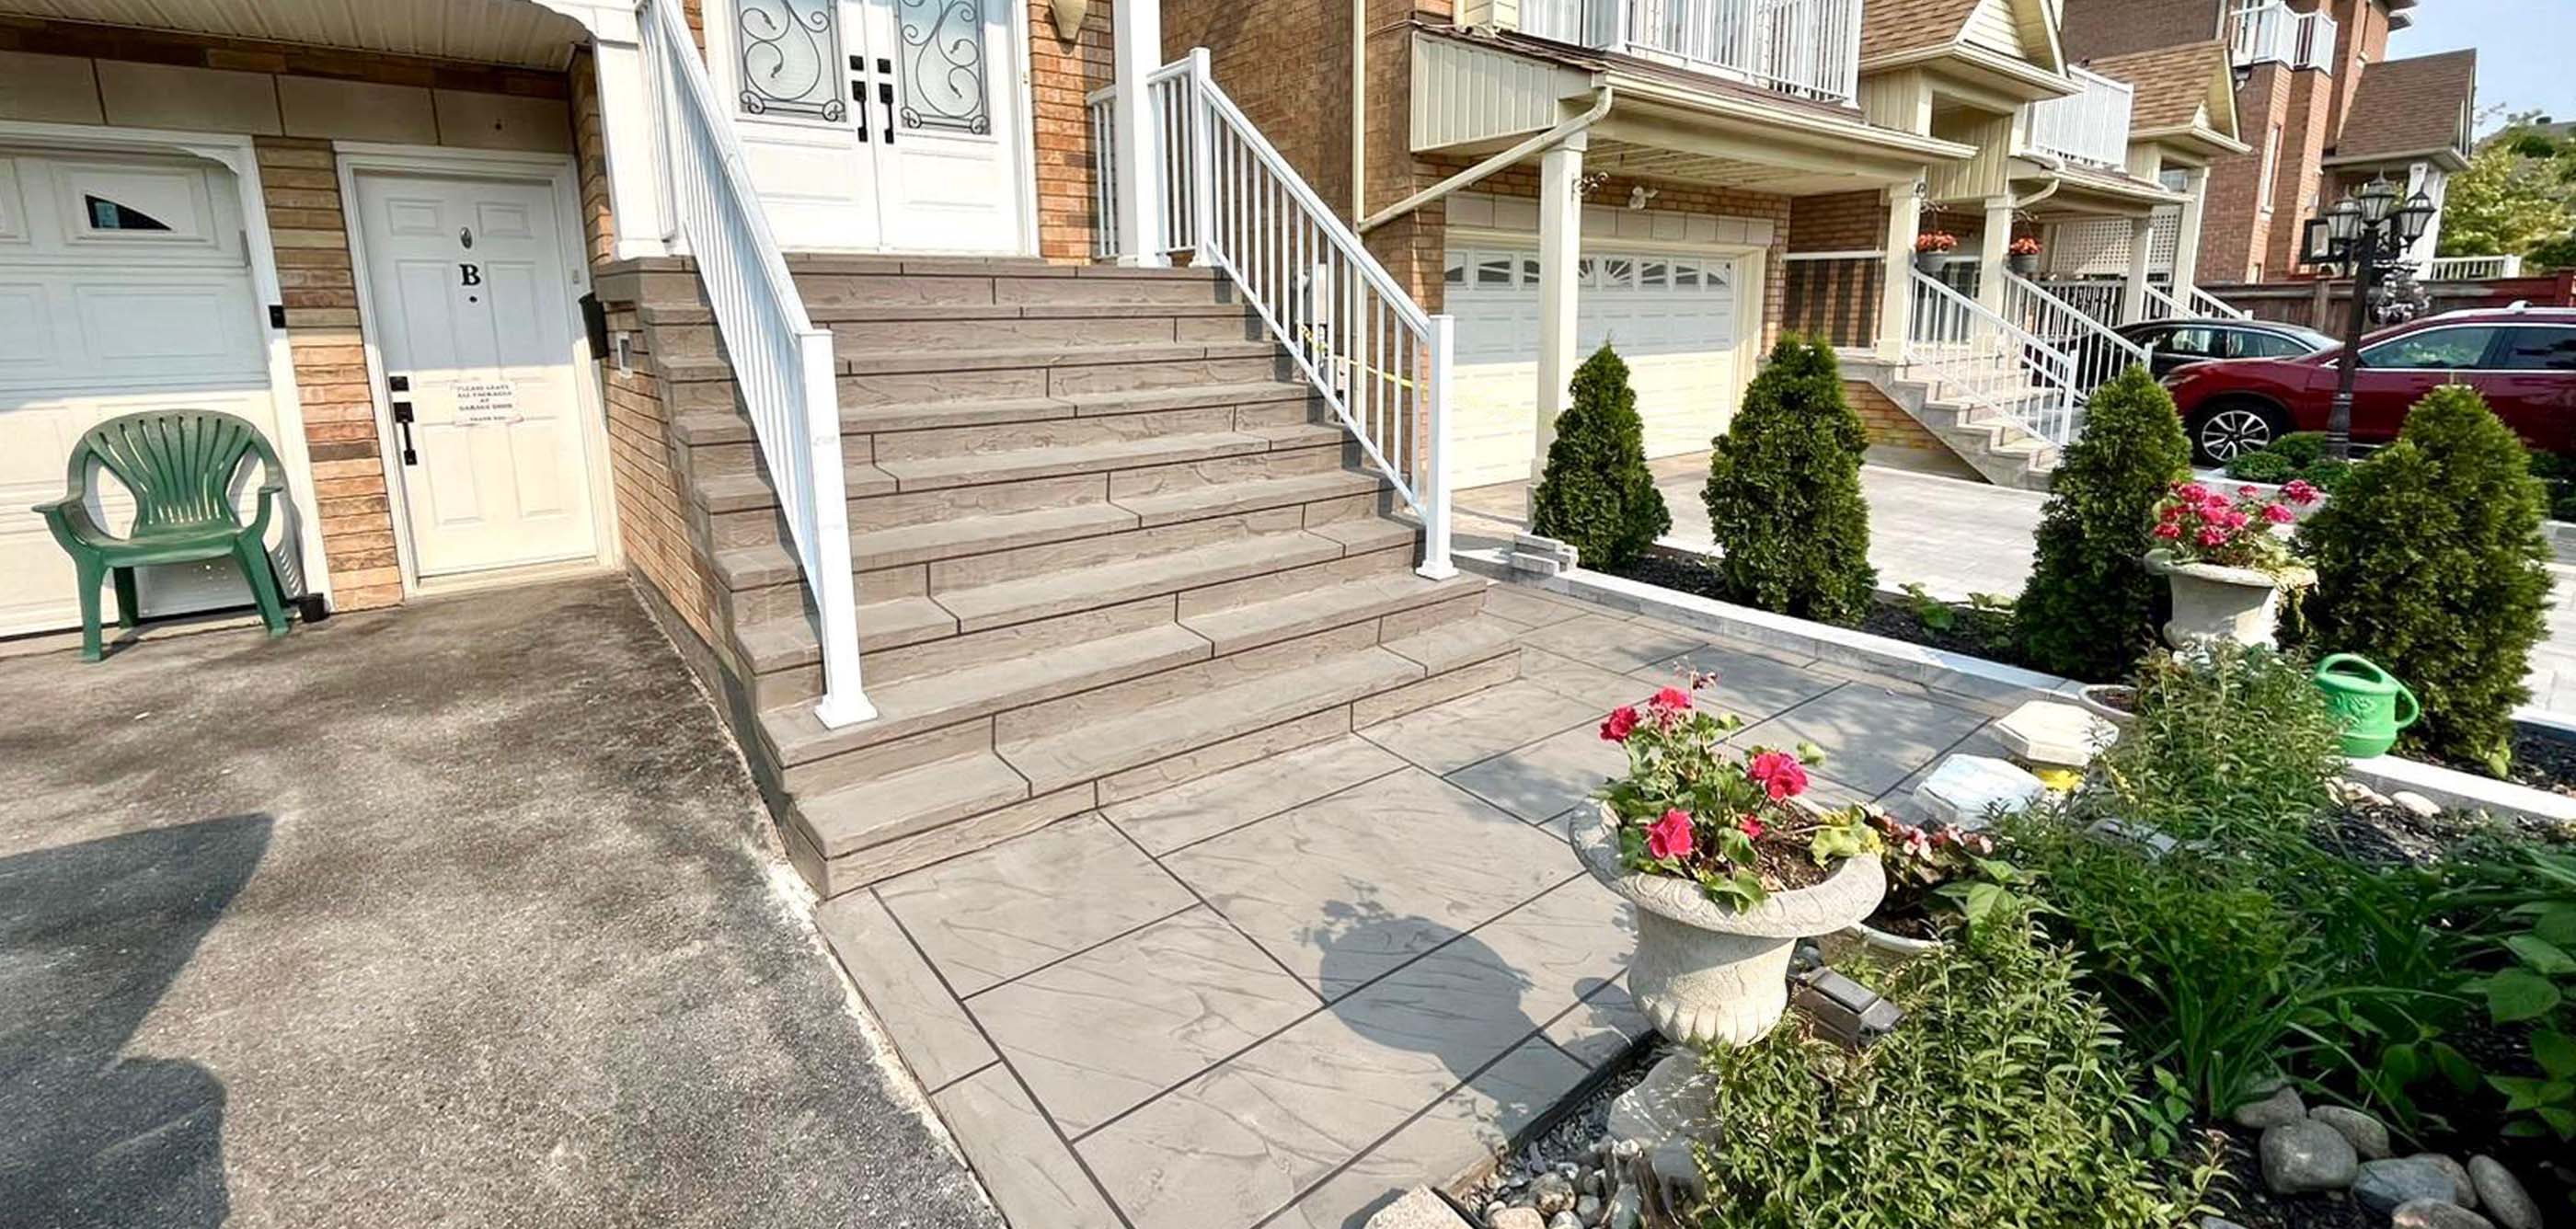 Jewel Stone porch and steps in Toronto